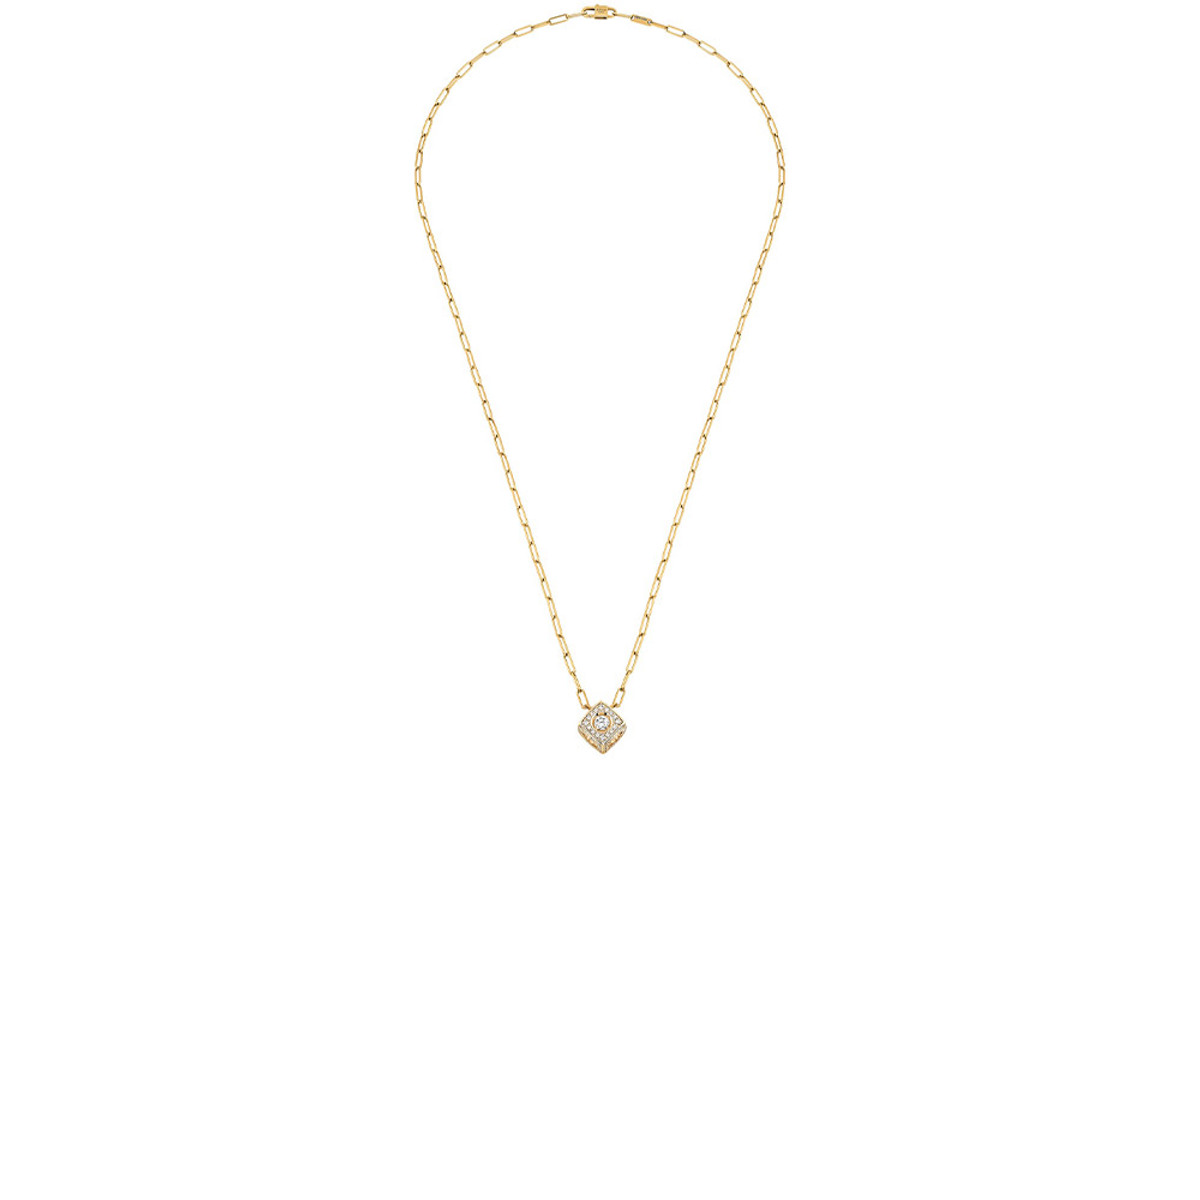 Dinh Van 18K Yellow Gold Le Cube Diamant XL Paved Pendant-60443 Product Image